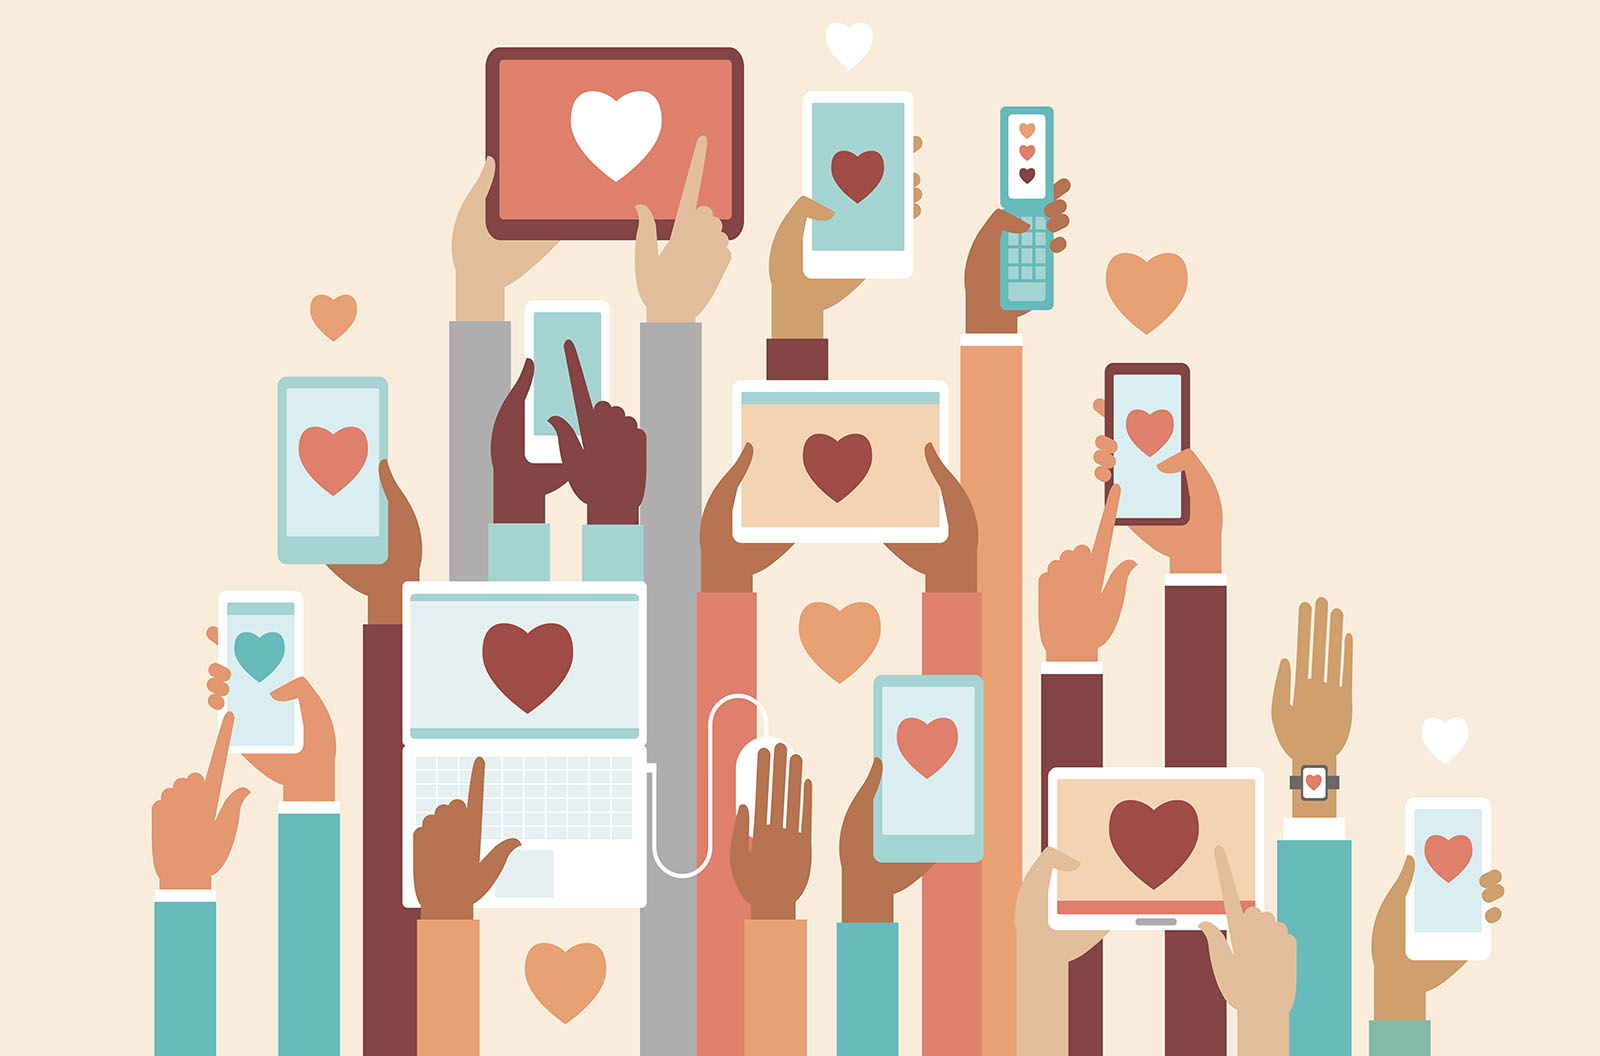 Vector illustrations of hands holding mobile devices and liking posts on social media.